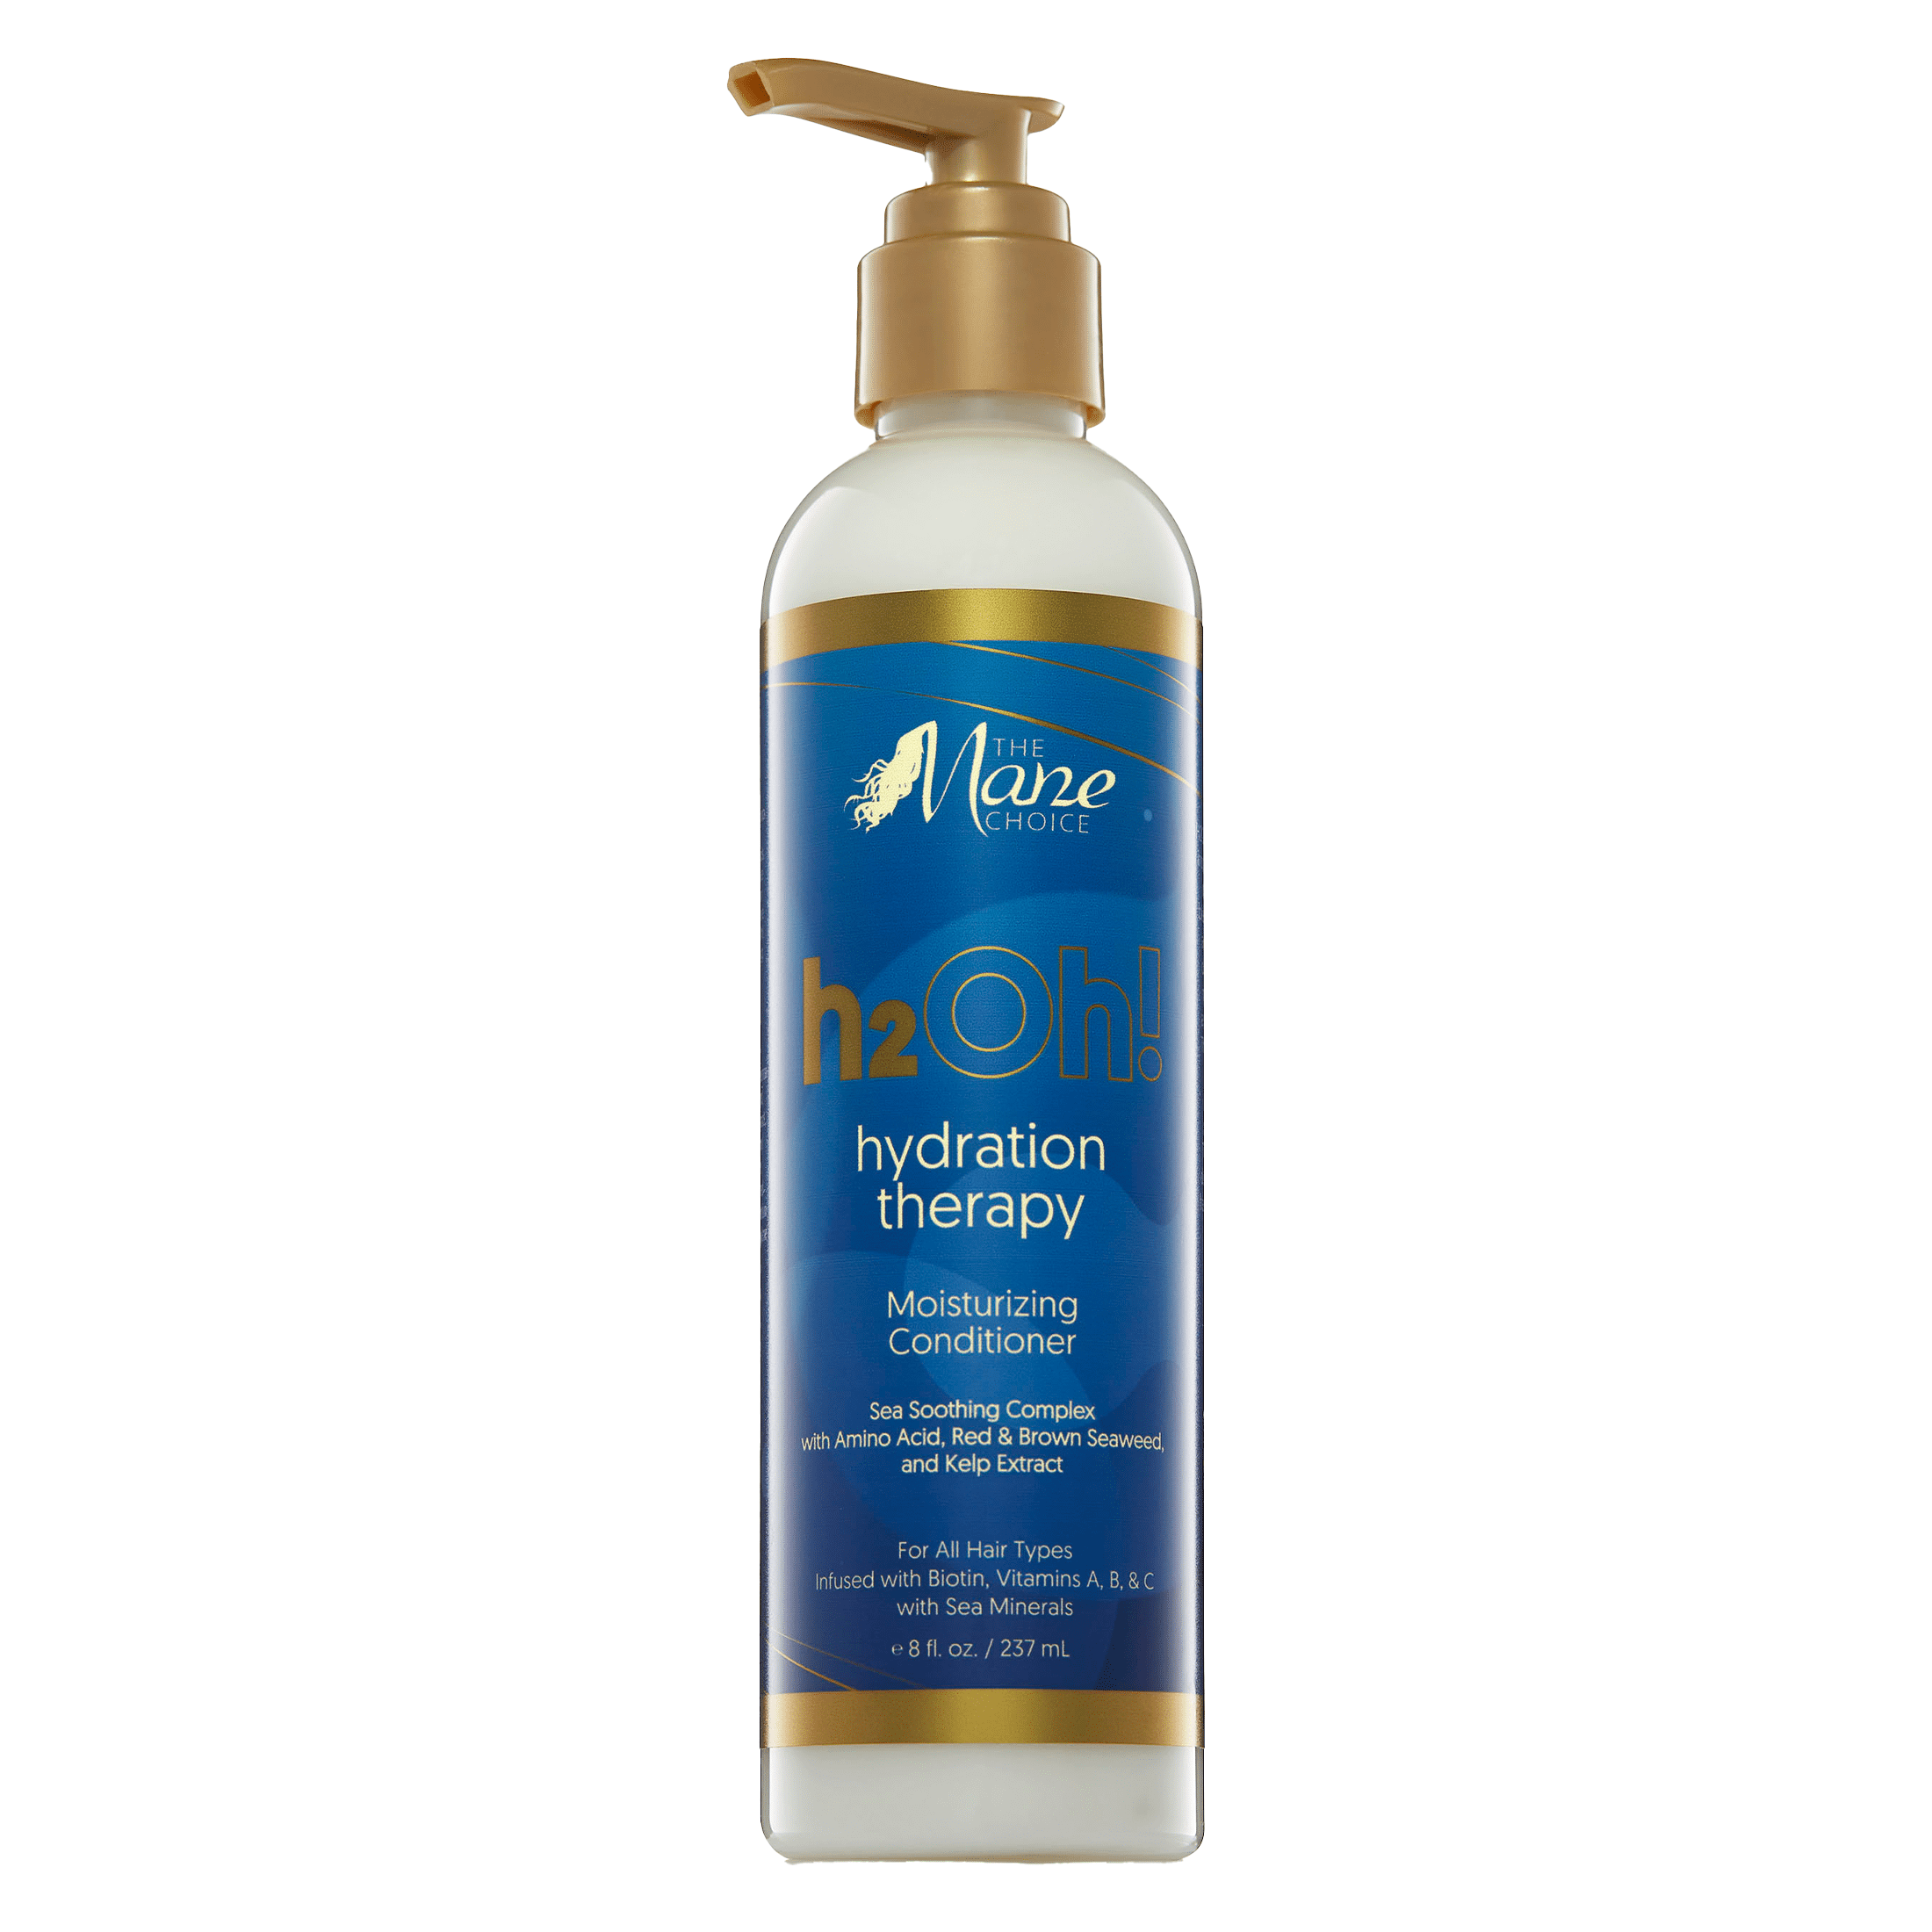 The Mane Choice H2Oh! Hydration Therapy Moisturizing Conditioner 8 fl oz